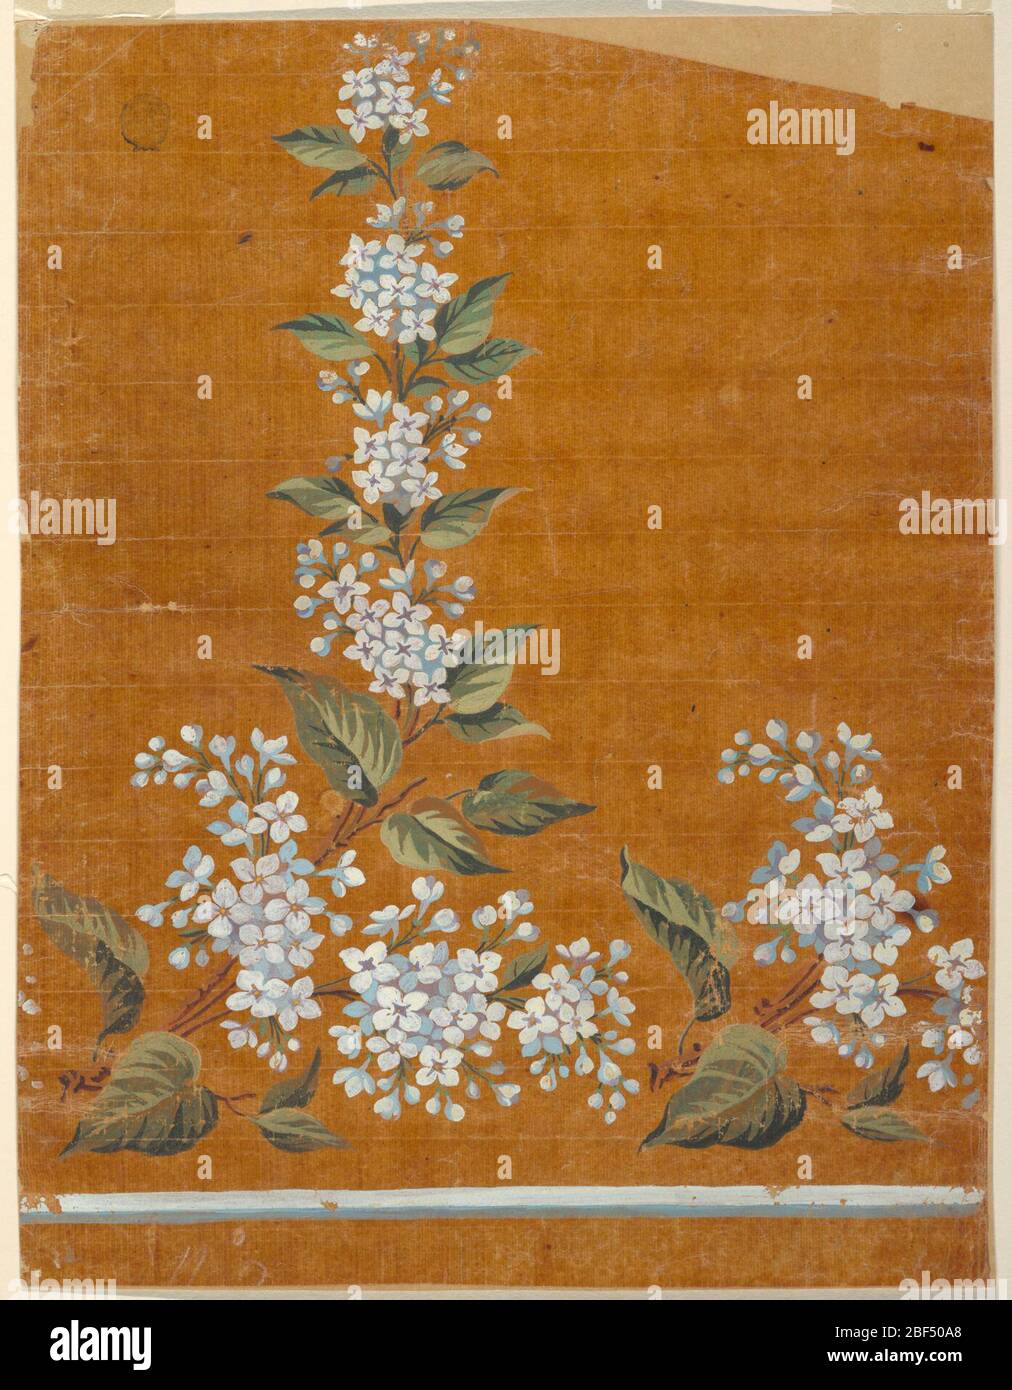 Design for the Border Motif of a Woven Fabric of the Fabrique de St Ruf. Boughs with leaves and and bluish blossoms stand over a white and blue stripe. One bough and the lower part of a second one are shown. Stock Photo